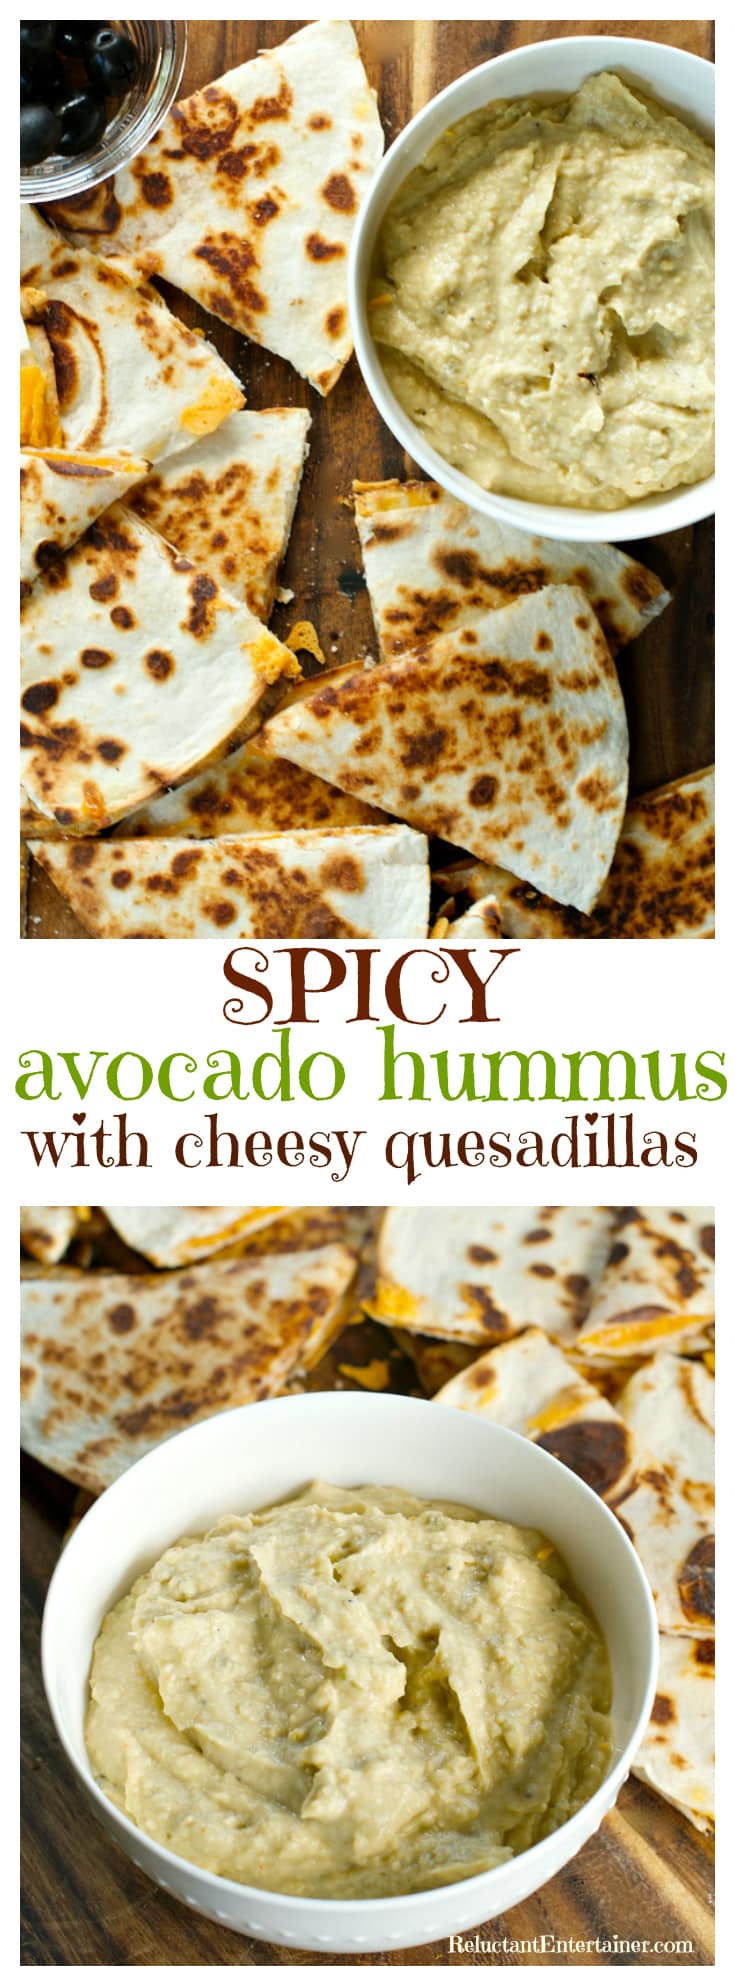 Spicy Avocado Hummus with Cheesy Quesadillas recipe is loved by kids, adults, and anyone in between, delicious served with a side of olives!